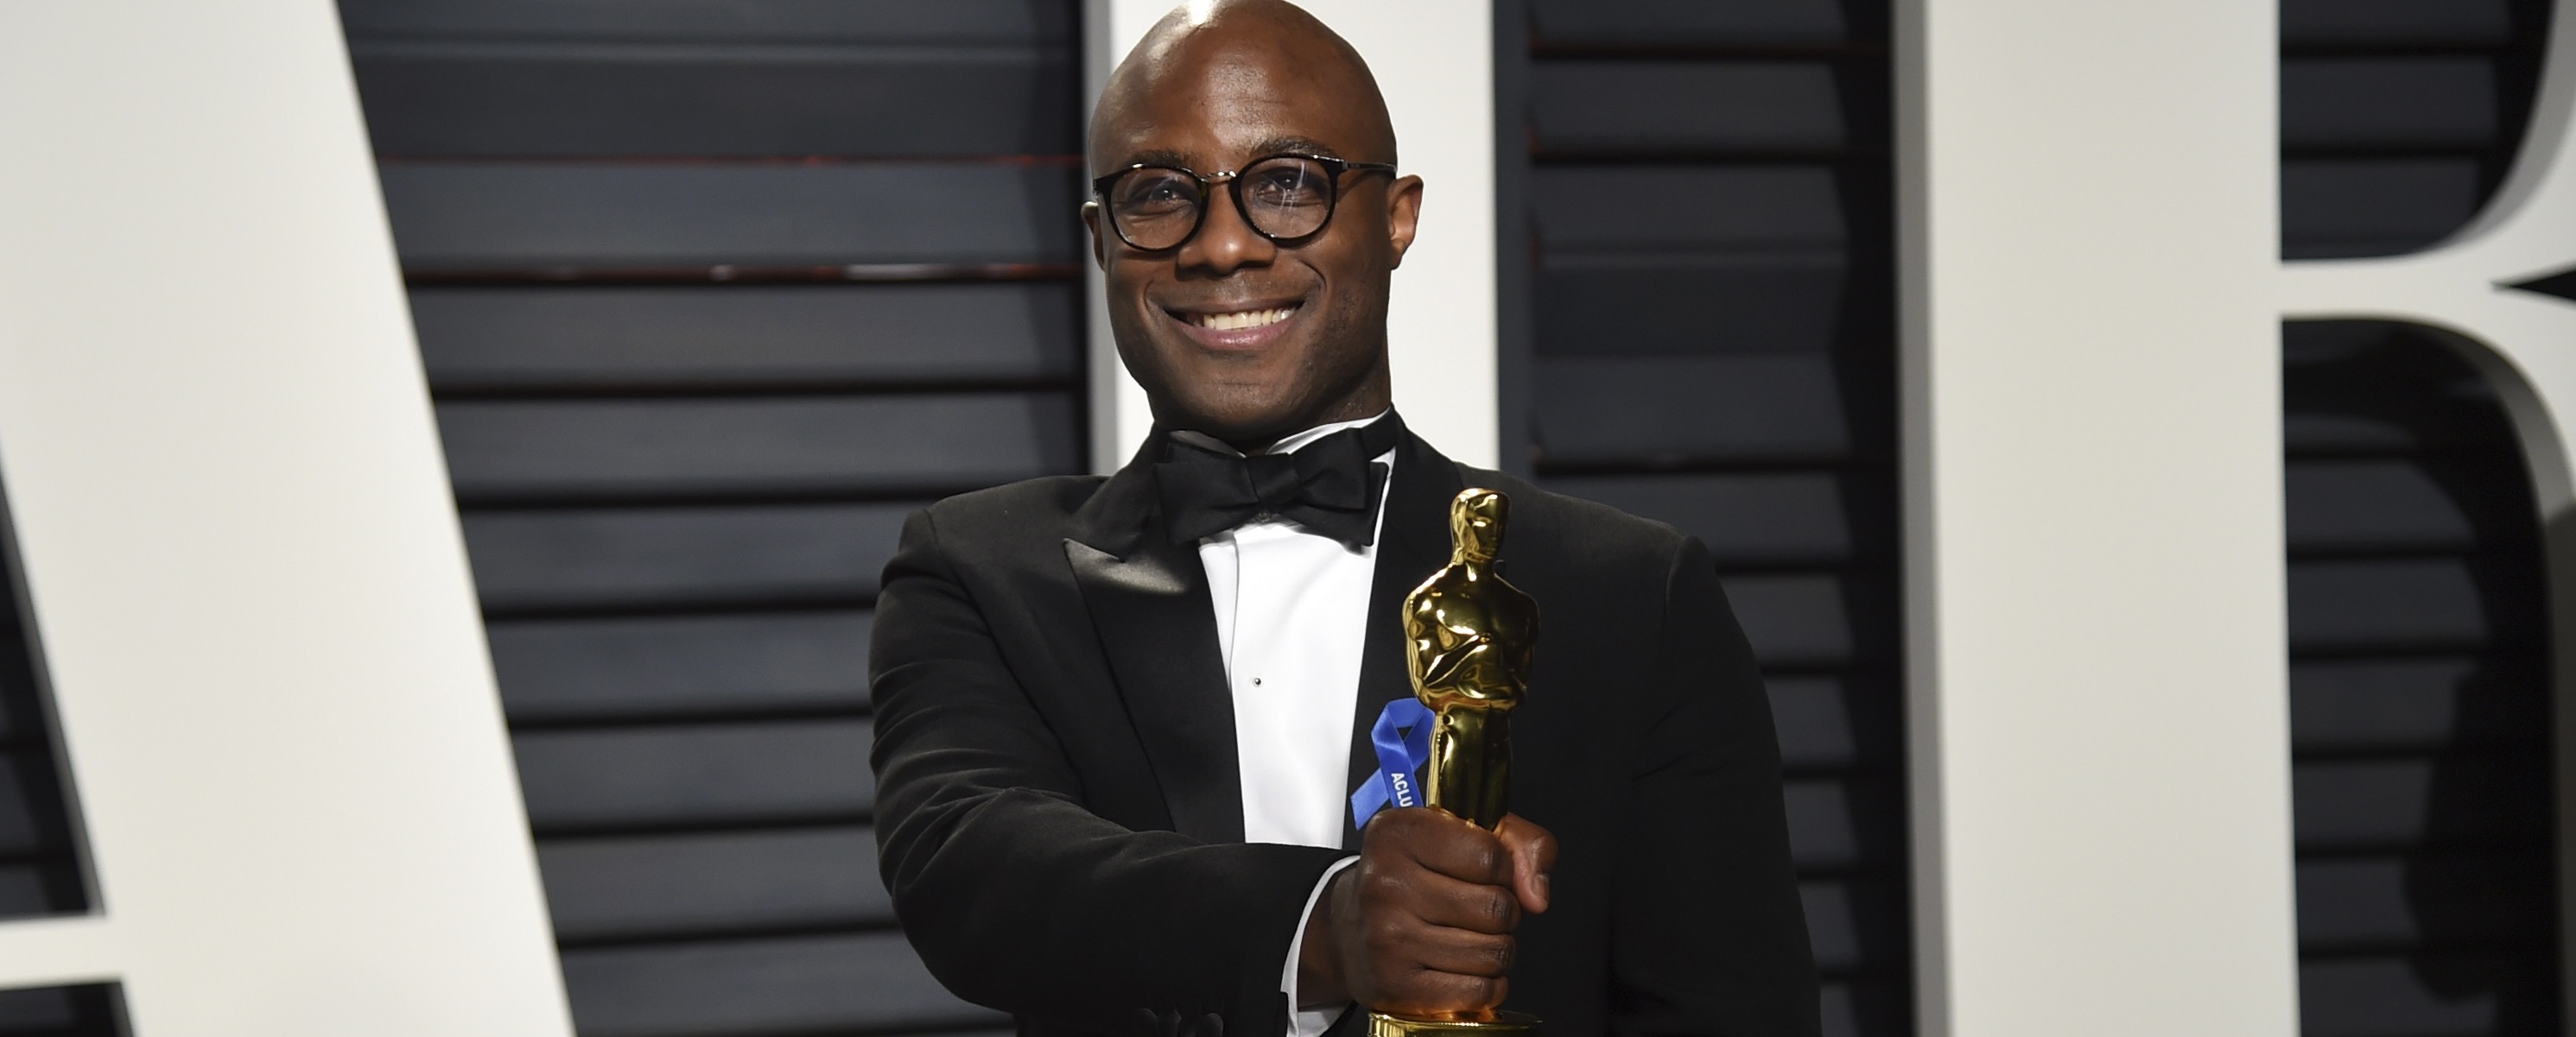 Barry Jenkins arrives at the Vanity Fair Oscar Party on Sunday, Feb. 26, 2017, in Beverly Hills, Calif. (Photo by Evan Agostini/Invision/AP)